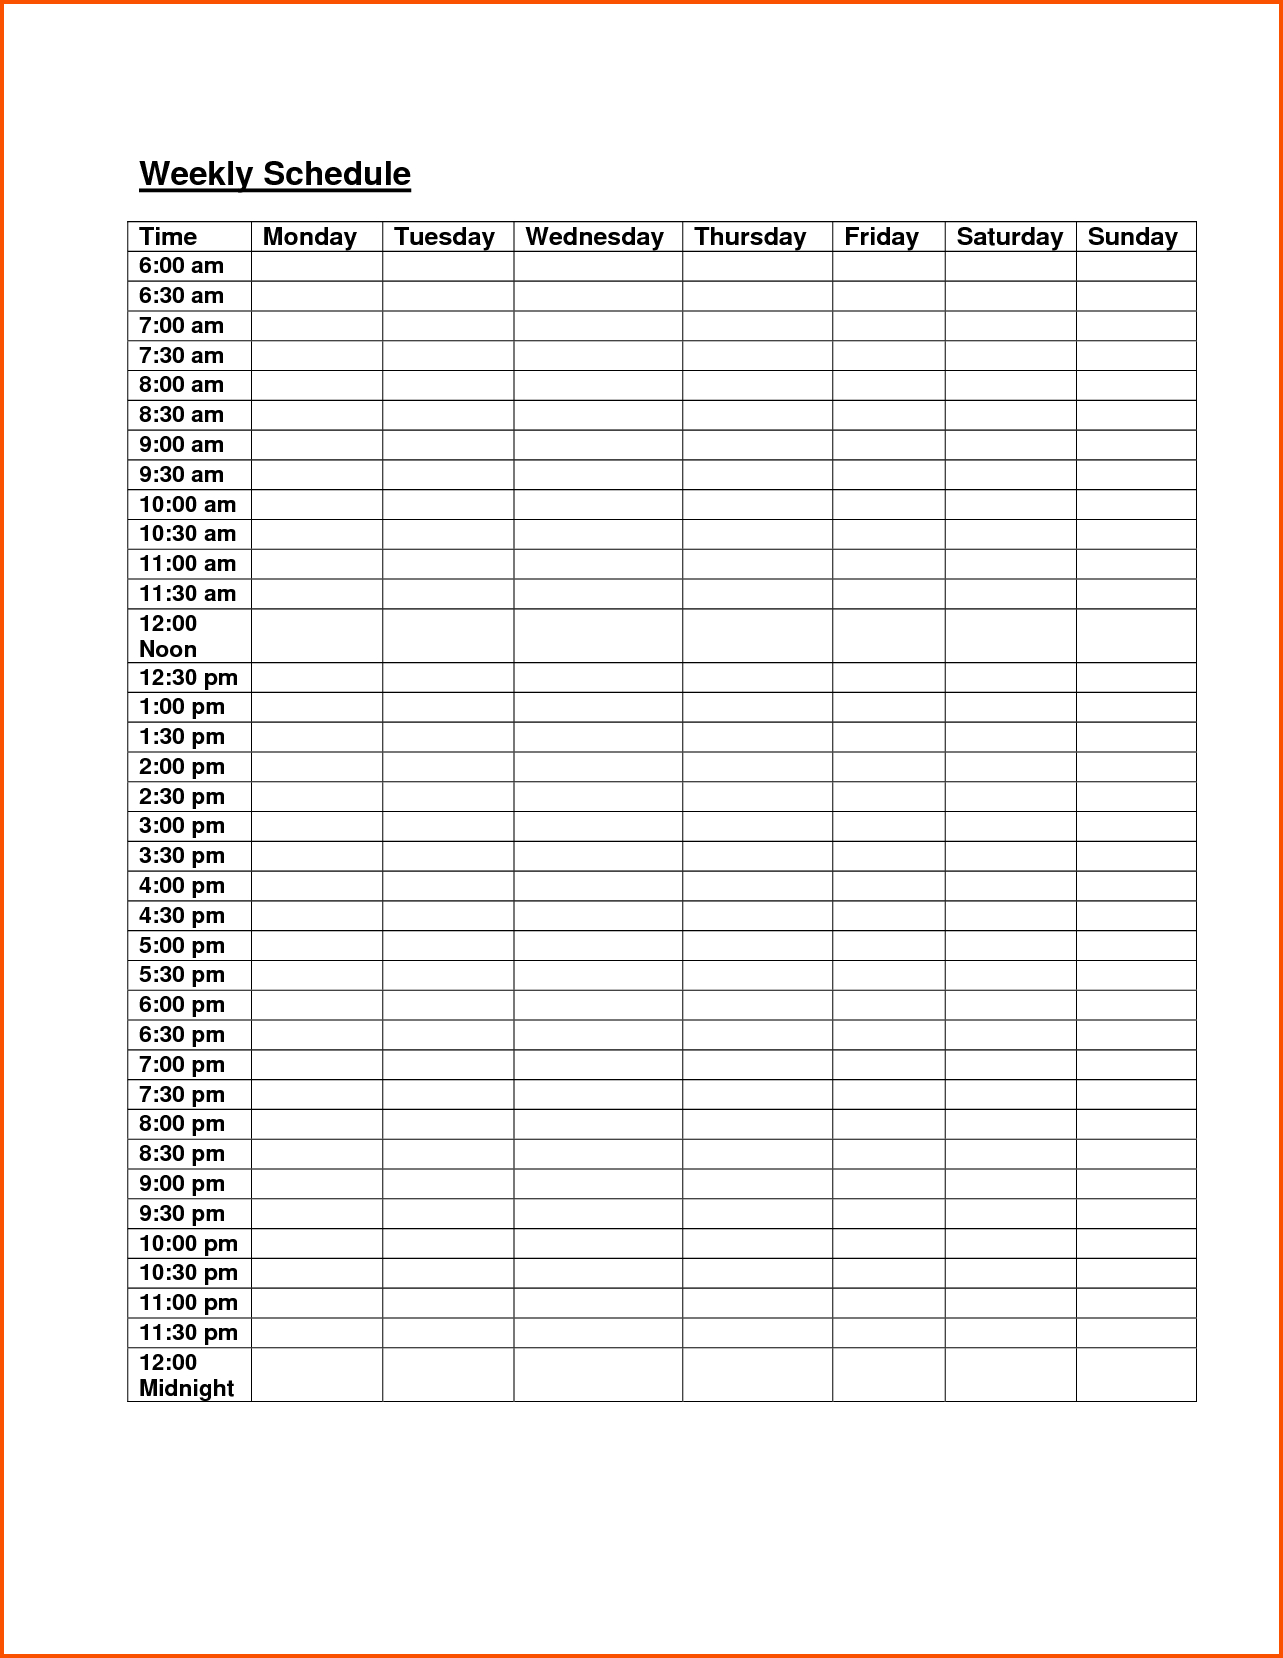 Free Weekly Class Schedule Template Excel #1 | Weekly